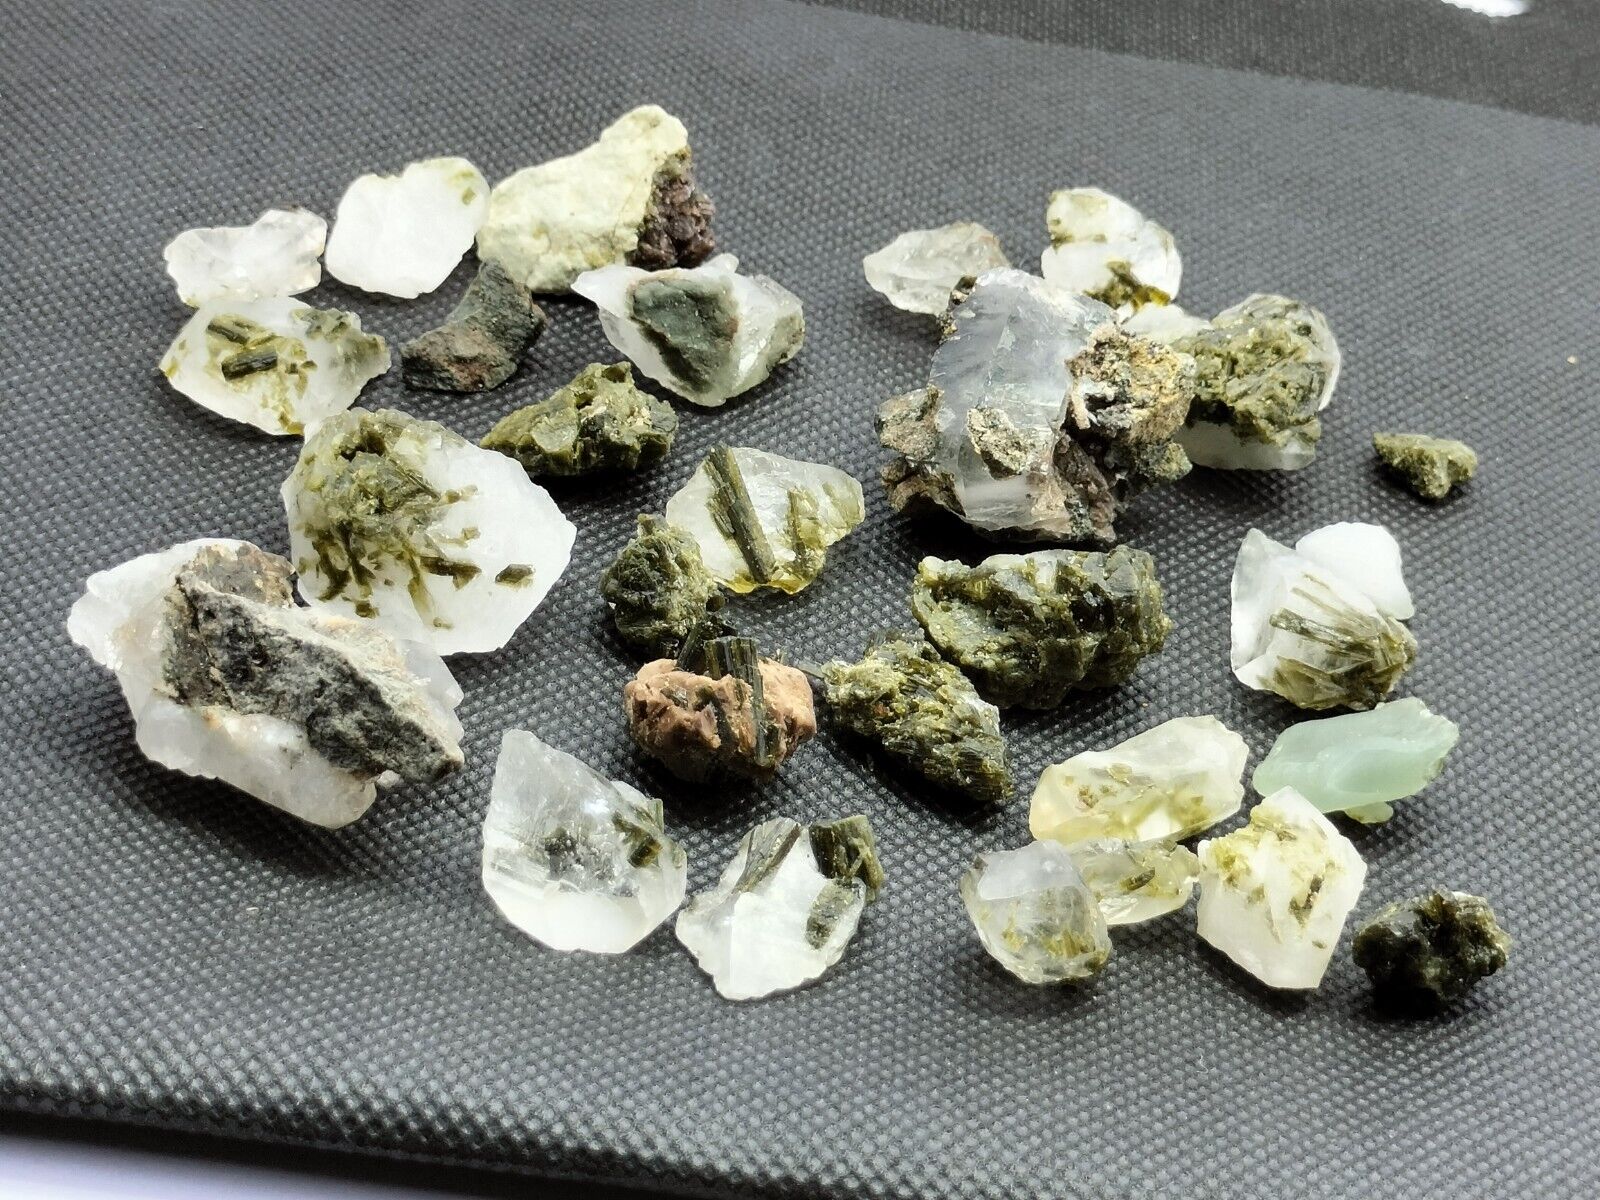 Epidote crystals specimens lot of (20+ PC's) from Balochistan Pakistan. 